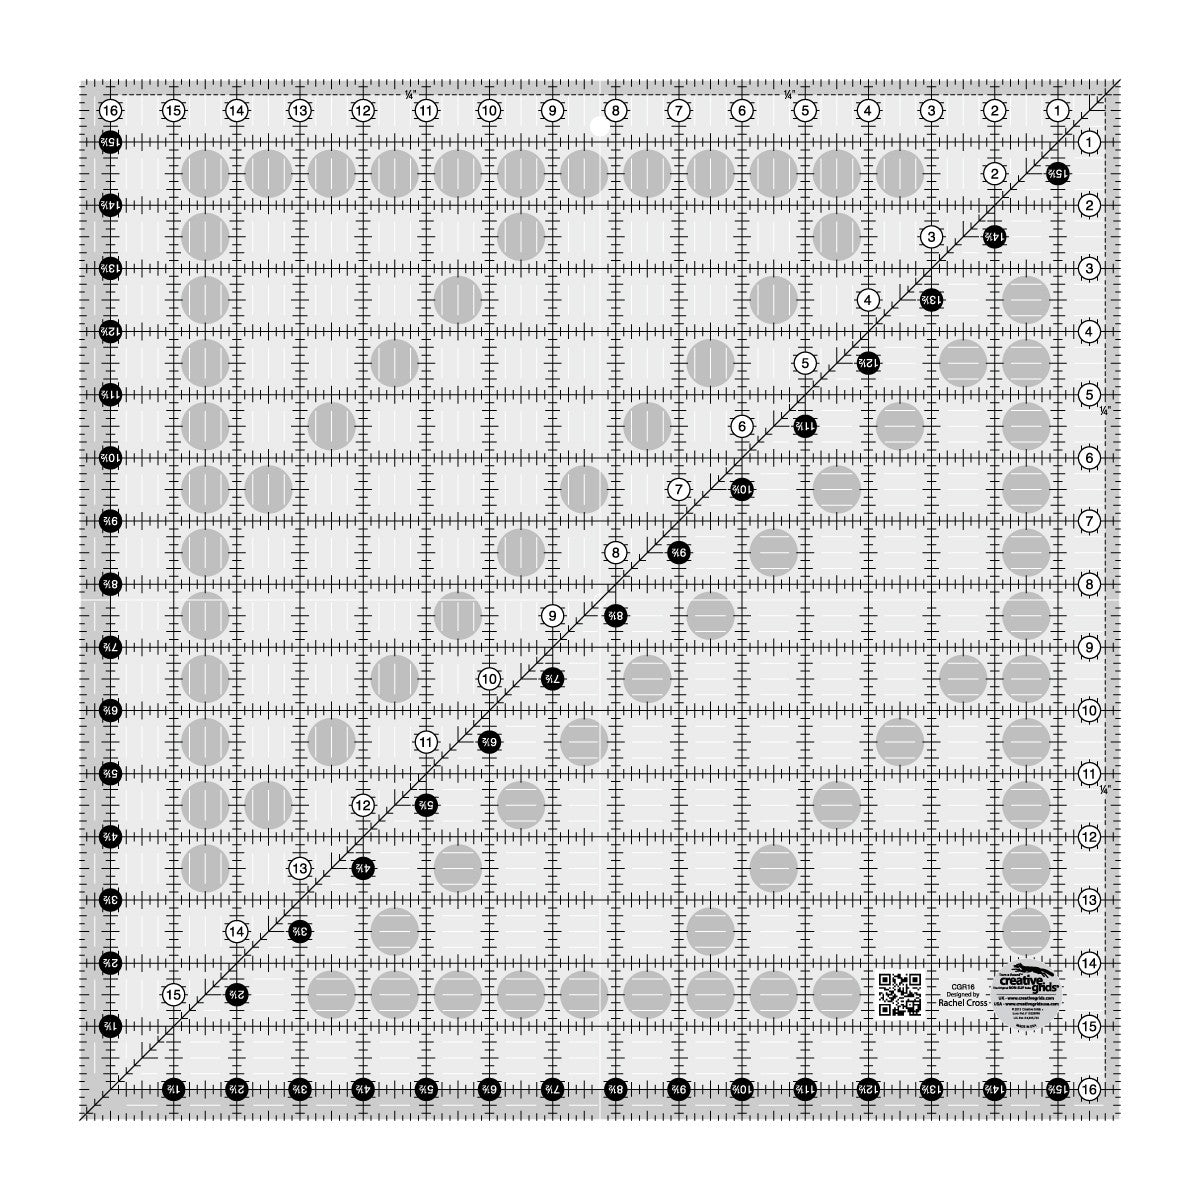 Creative Grids 10.5 x 10.5 Inch Square Quilt Ruler CGR10